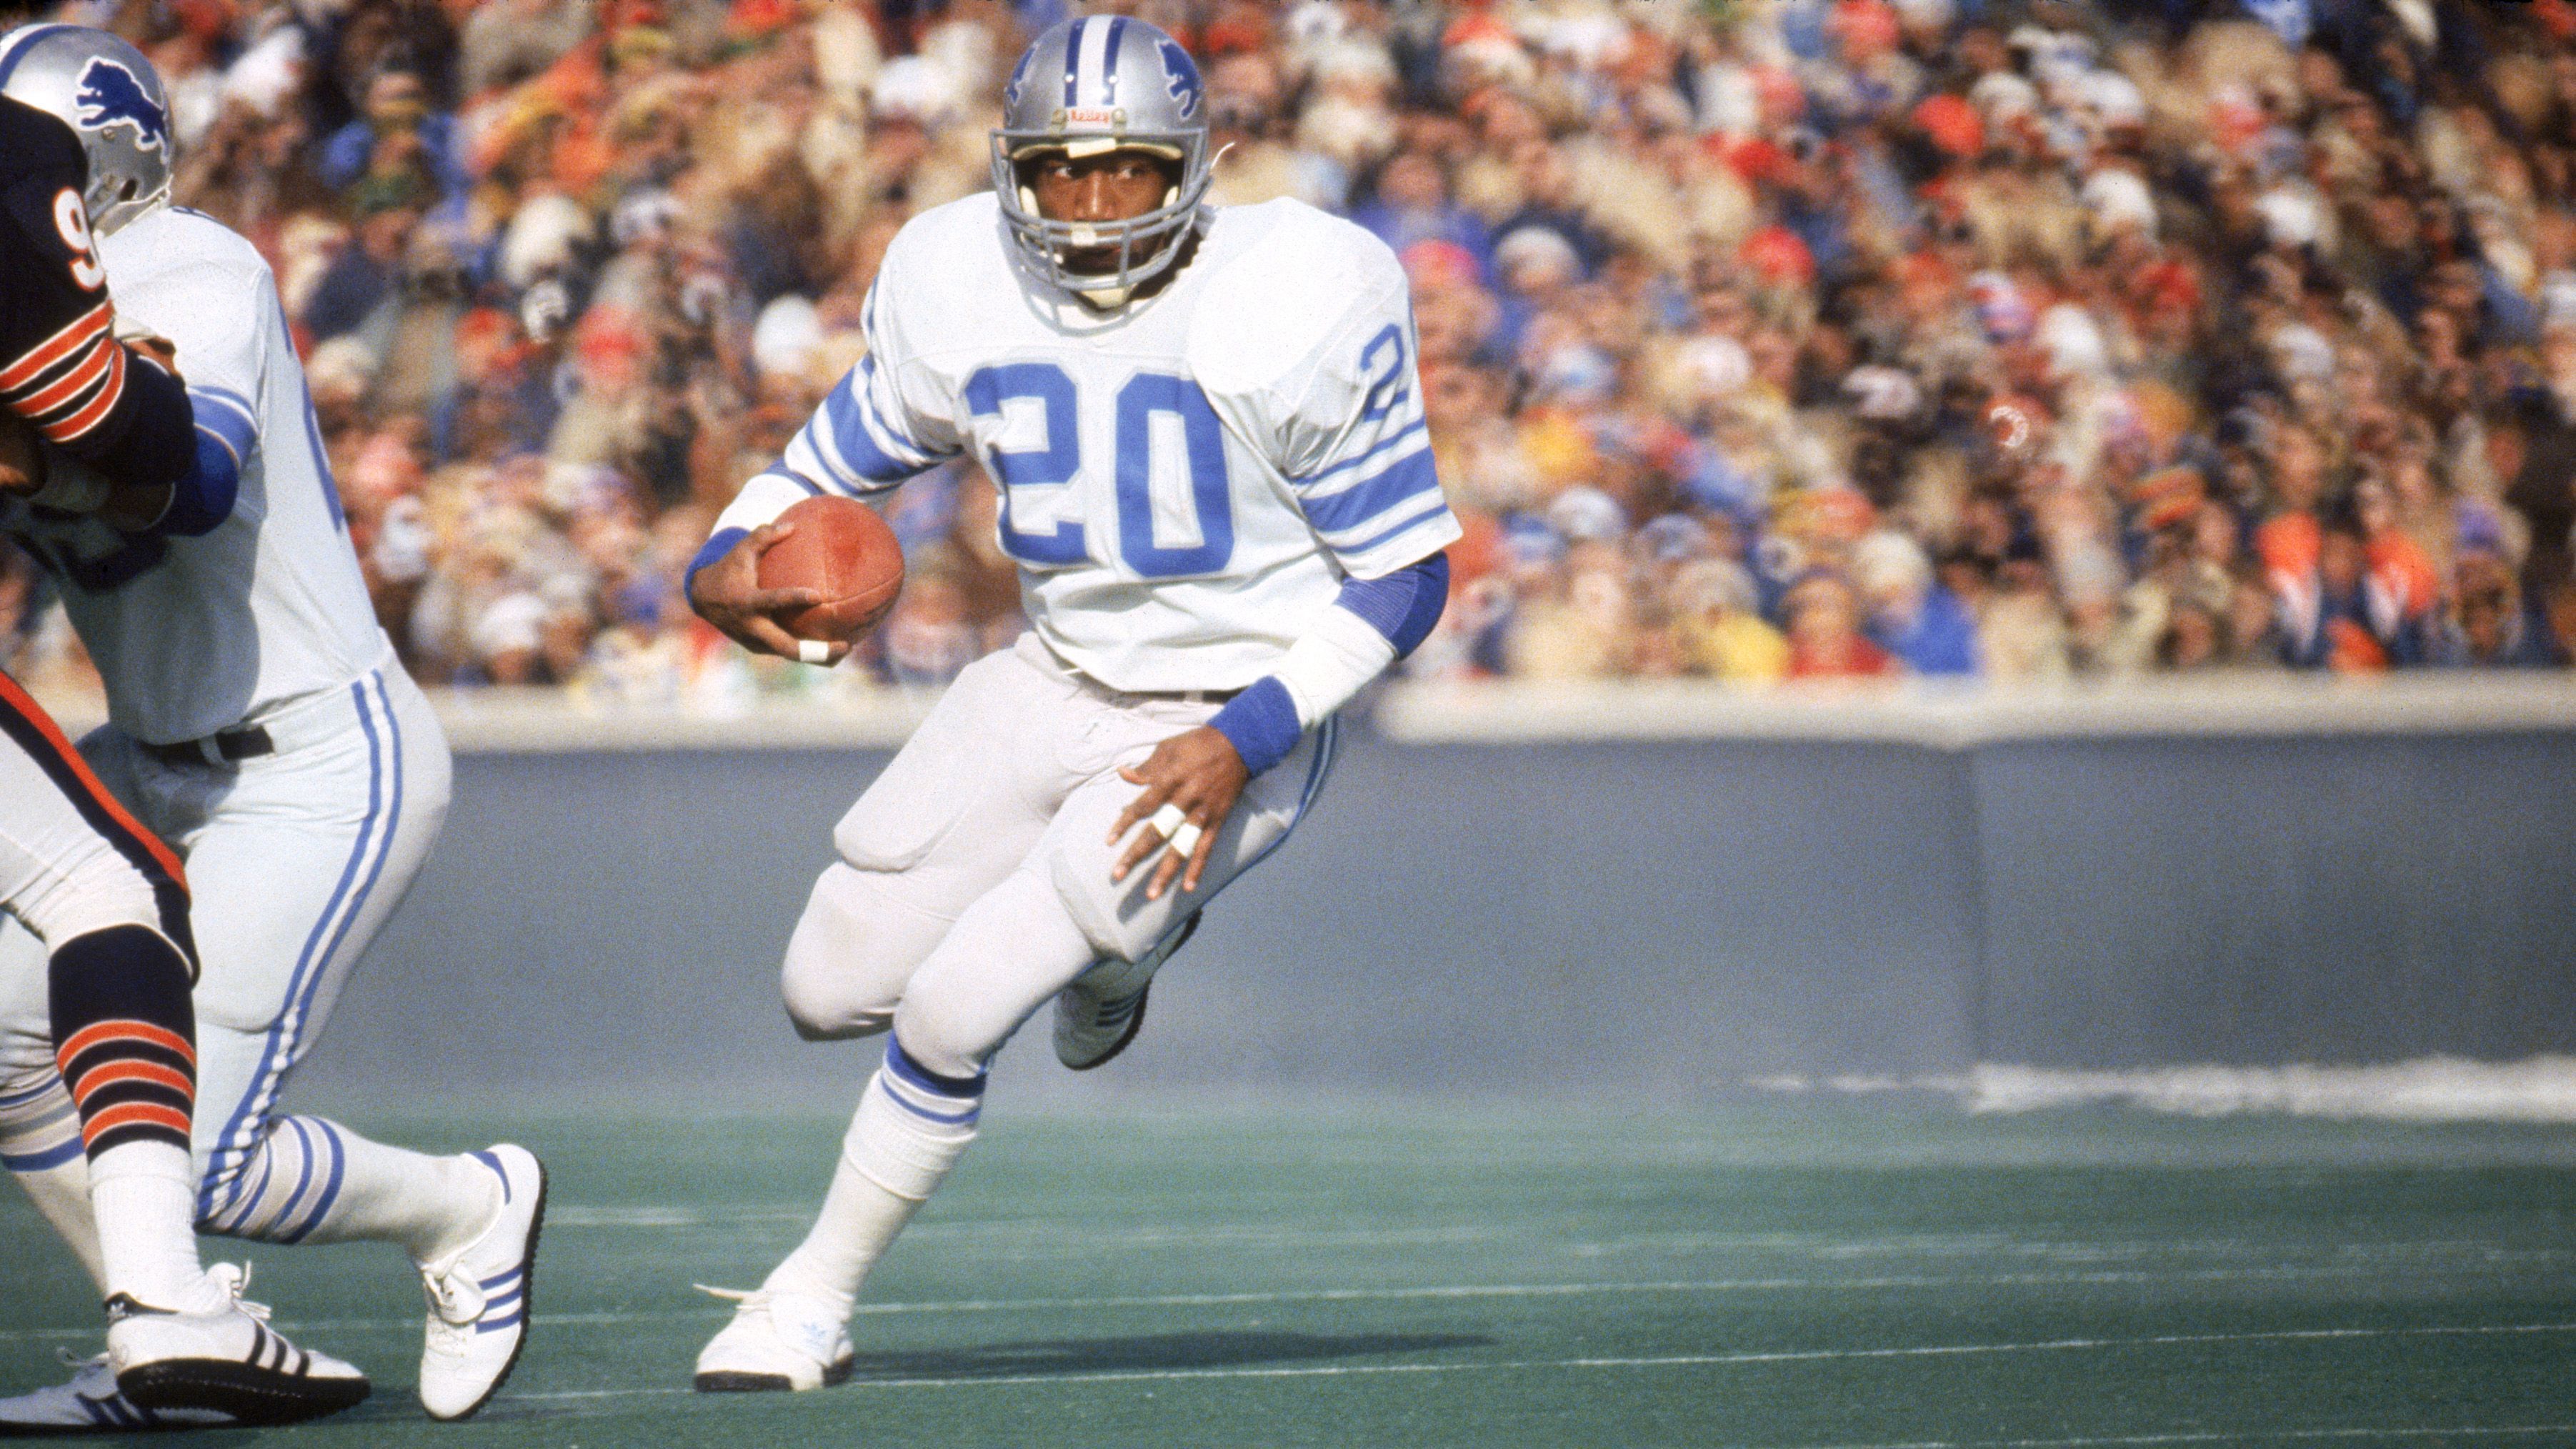 <strong>Billy Sims - 1980</strong><br>Position: Running Back<br>Draft-Team: Detroit Lions<br>Erfolge: Heisman Trophy, 3x Pro Bowl, Offensive Rookie of the Year<br>Karriereende: 1984